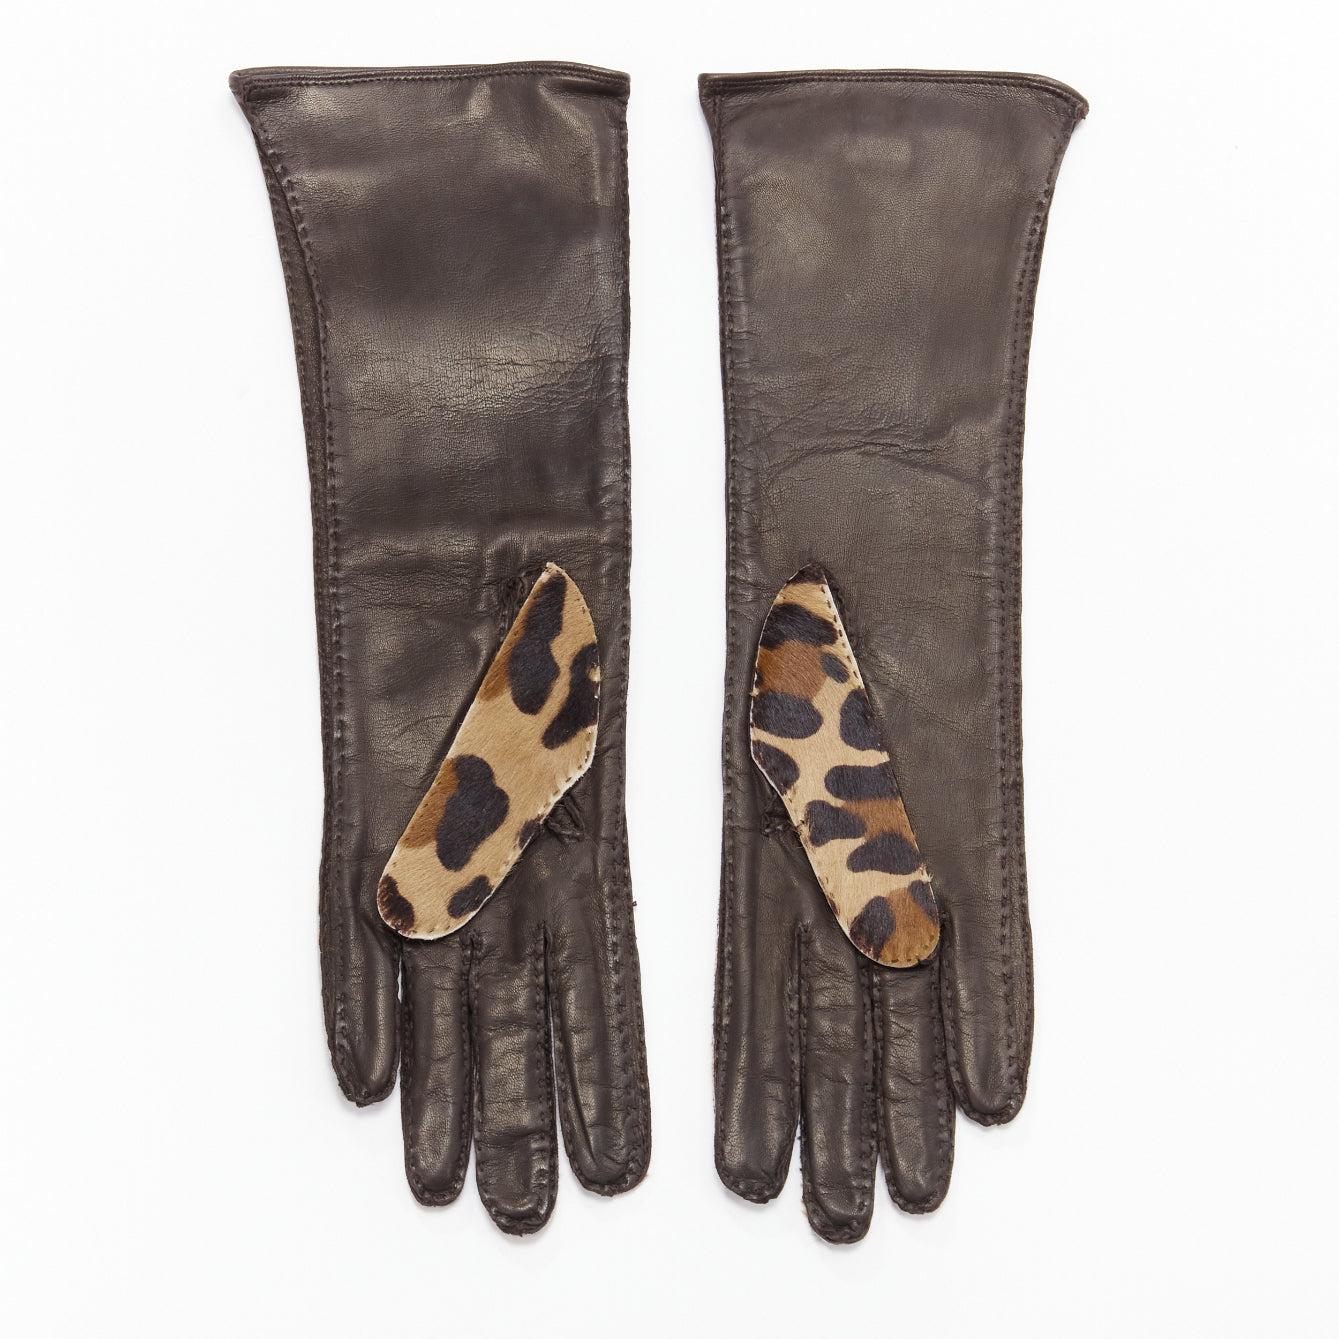 PRADA leopard print ponyhair leather mid length gloves Sz6.5
Reference: BSHW/A00127
Brand: Prada
Designer: Miuccia Prada
Material: Leather, Pony Hair
Color: Brown, Beige
Pattern: Leopard
Closure: Slip On
Lining: Brown
Made in: